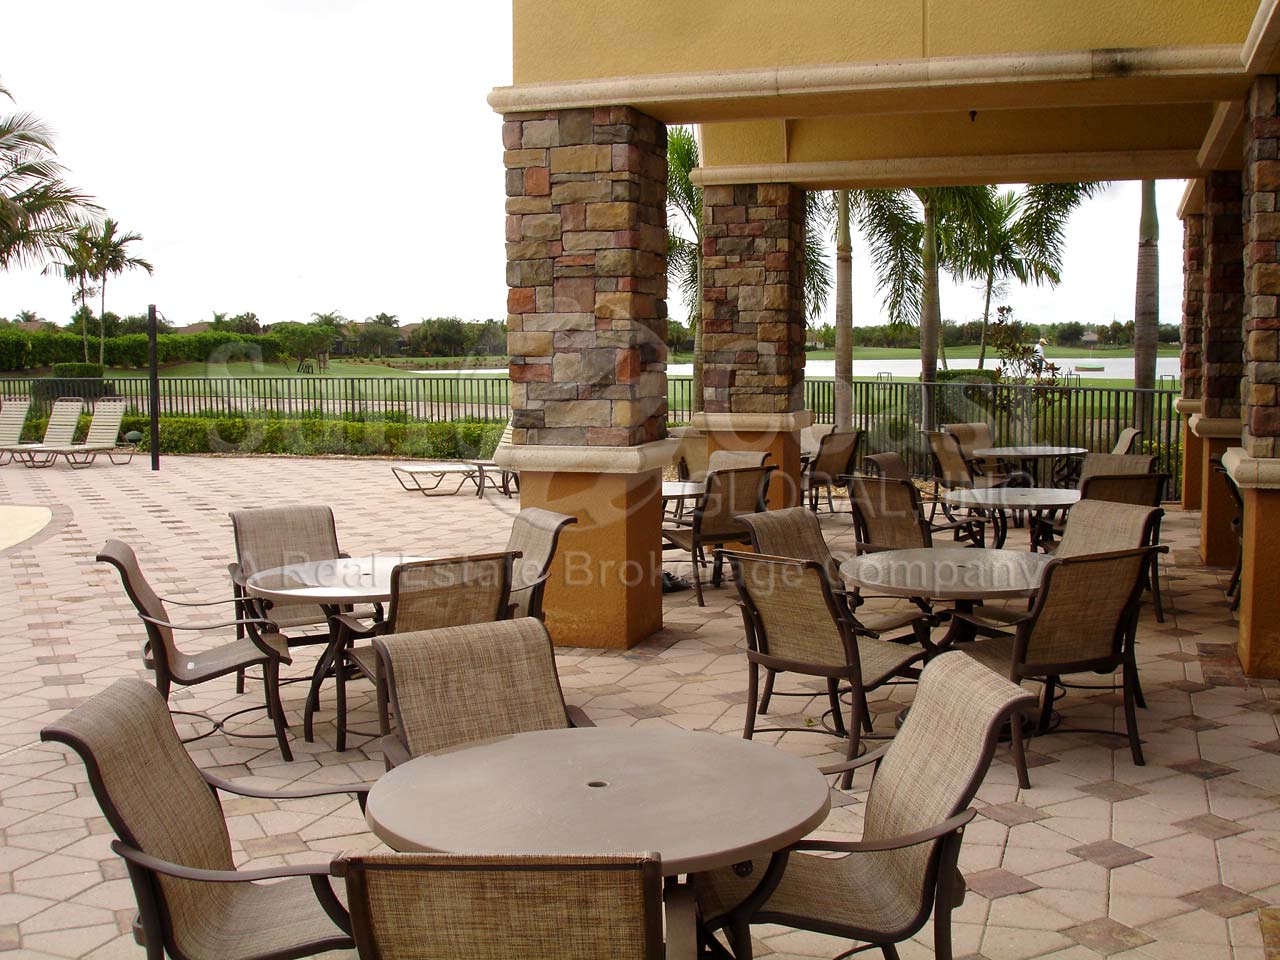 HERITAGE BAY Golf and Country Club pool area and bar